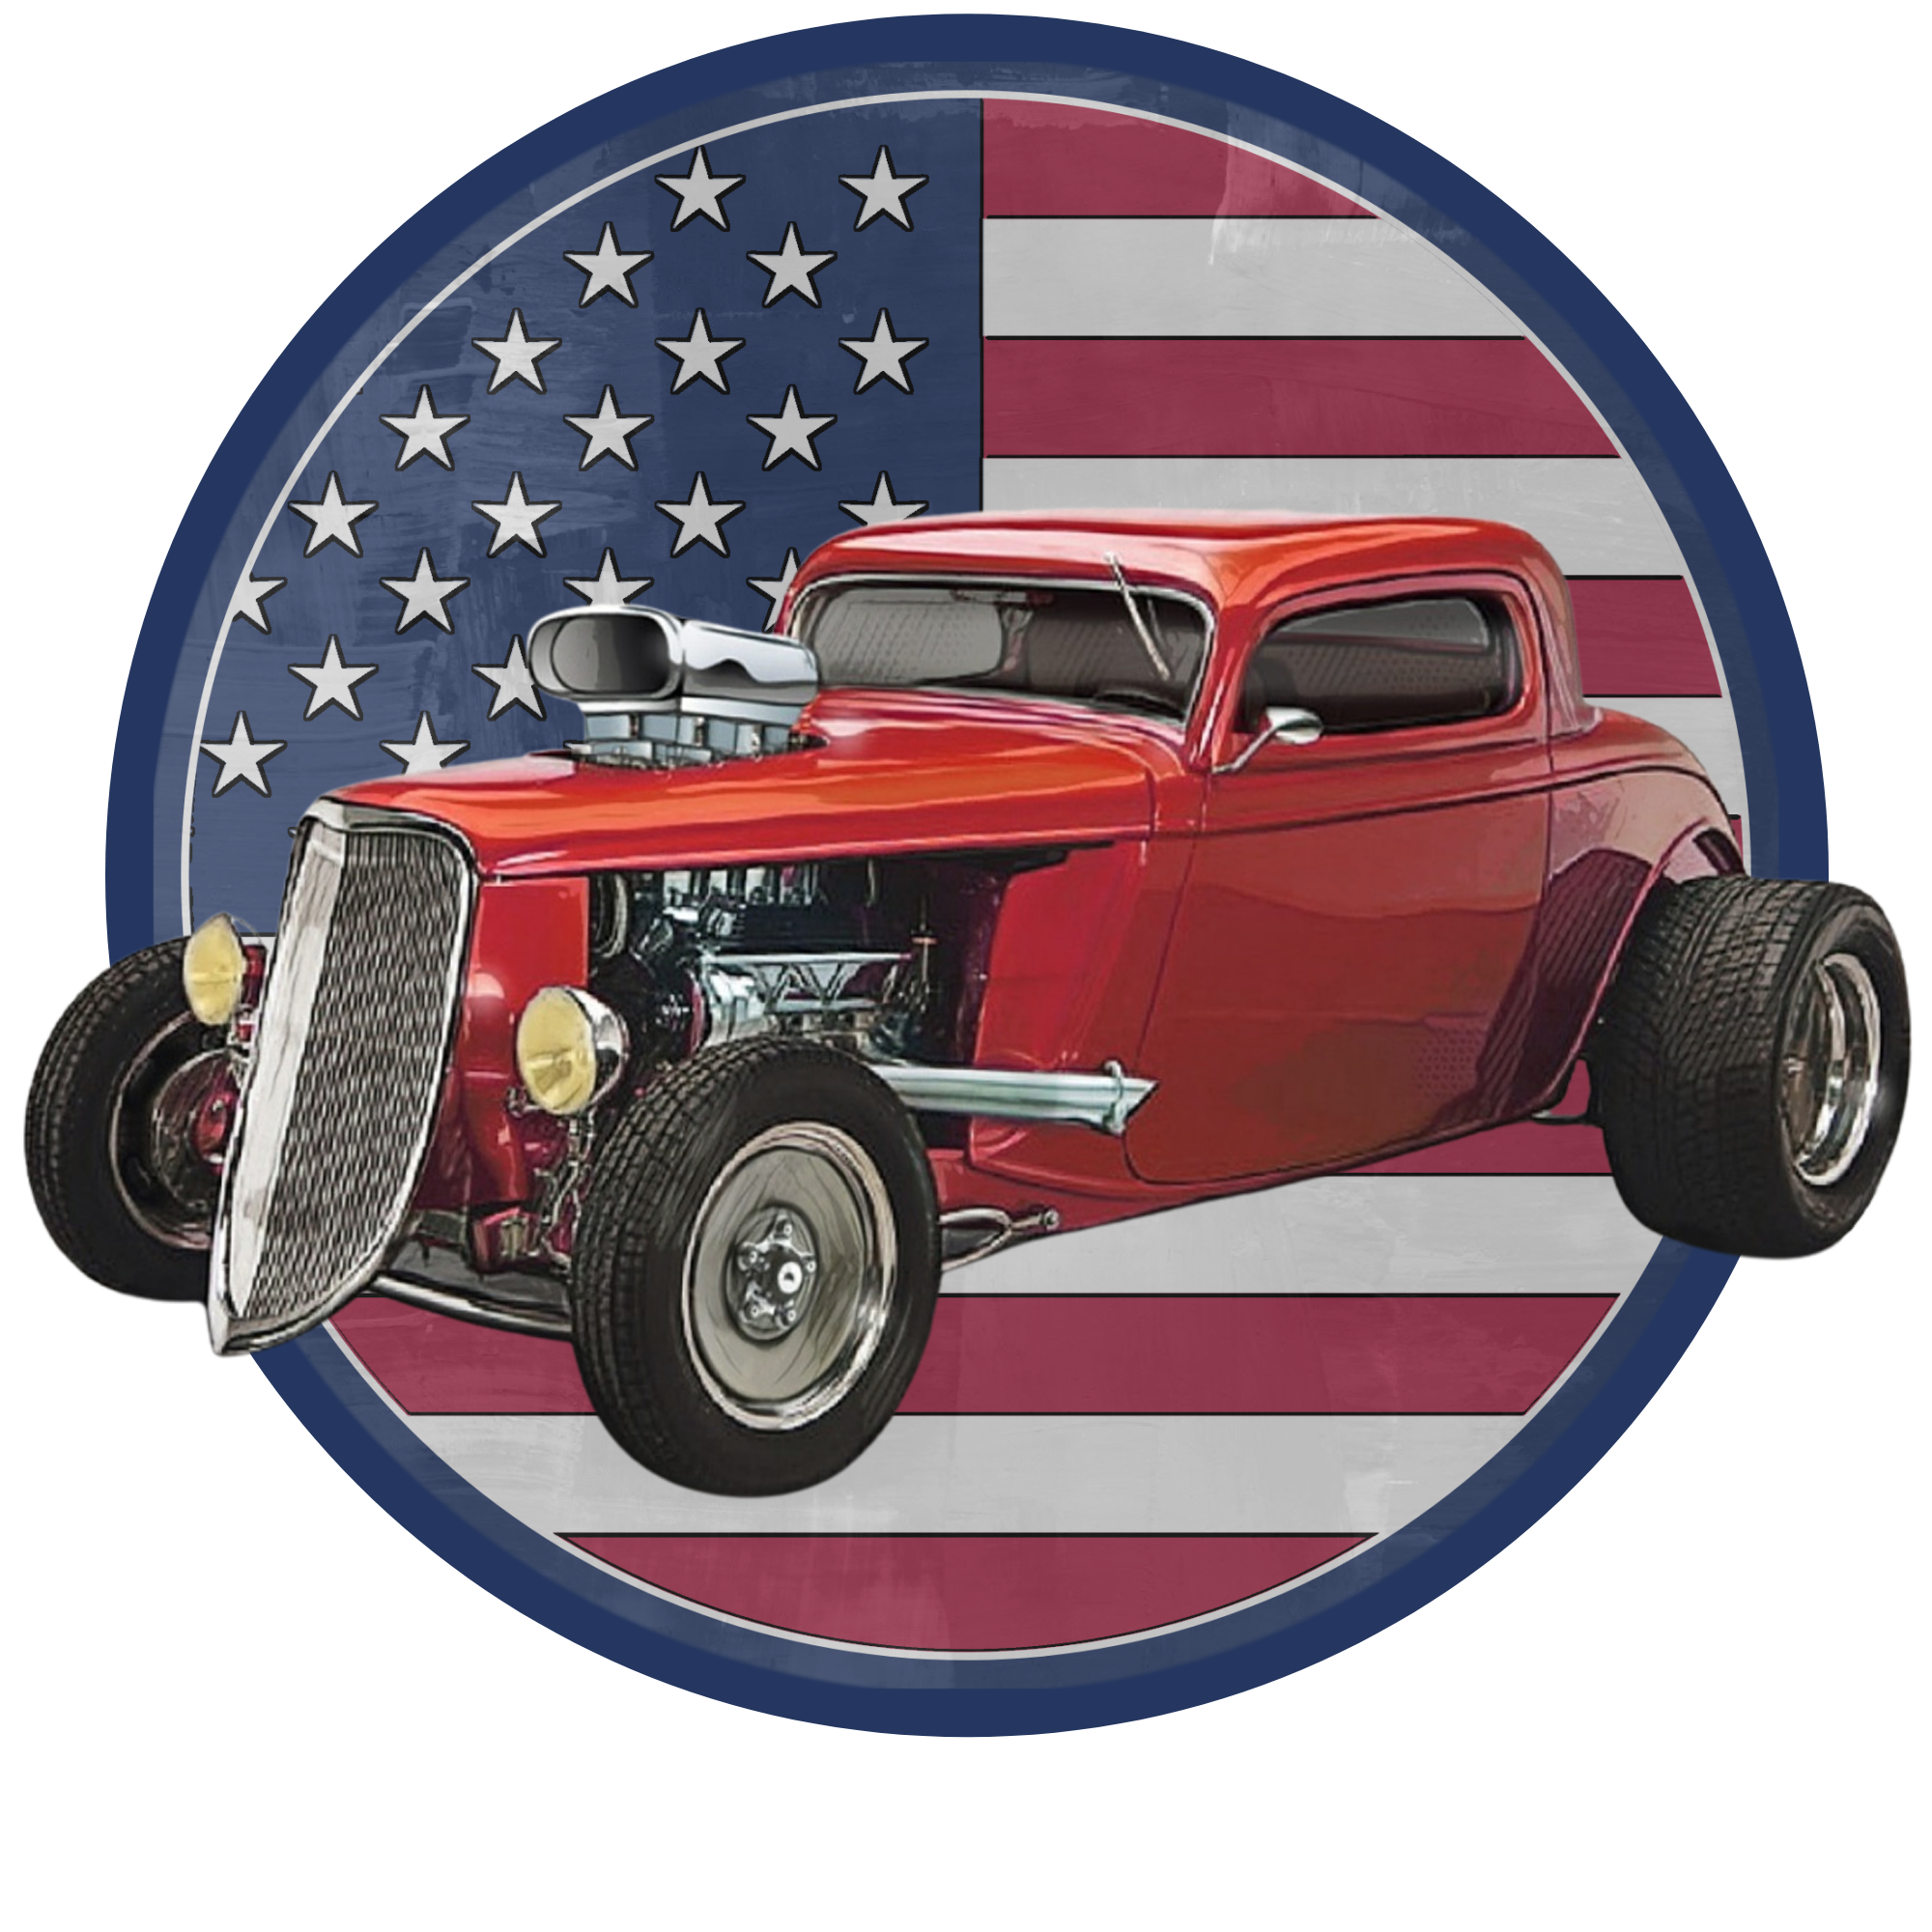 Hot Rod with American Flag - Image